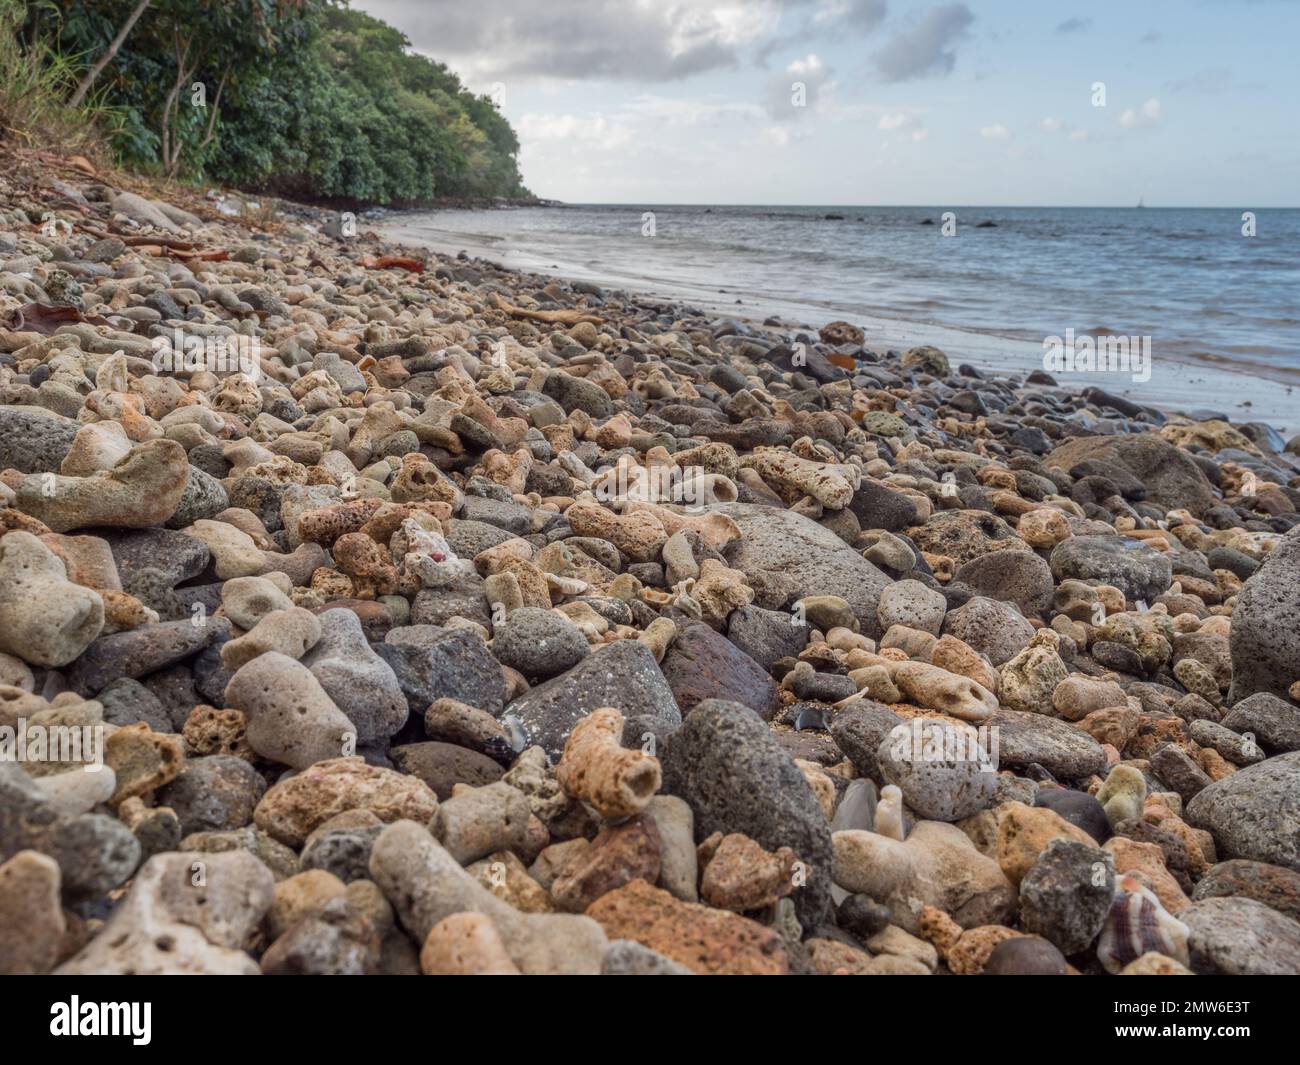 a low view close up of coral rubble shingle stone beach sea Caribbean ocean Stock Photo